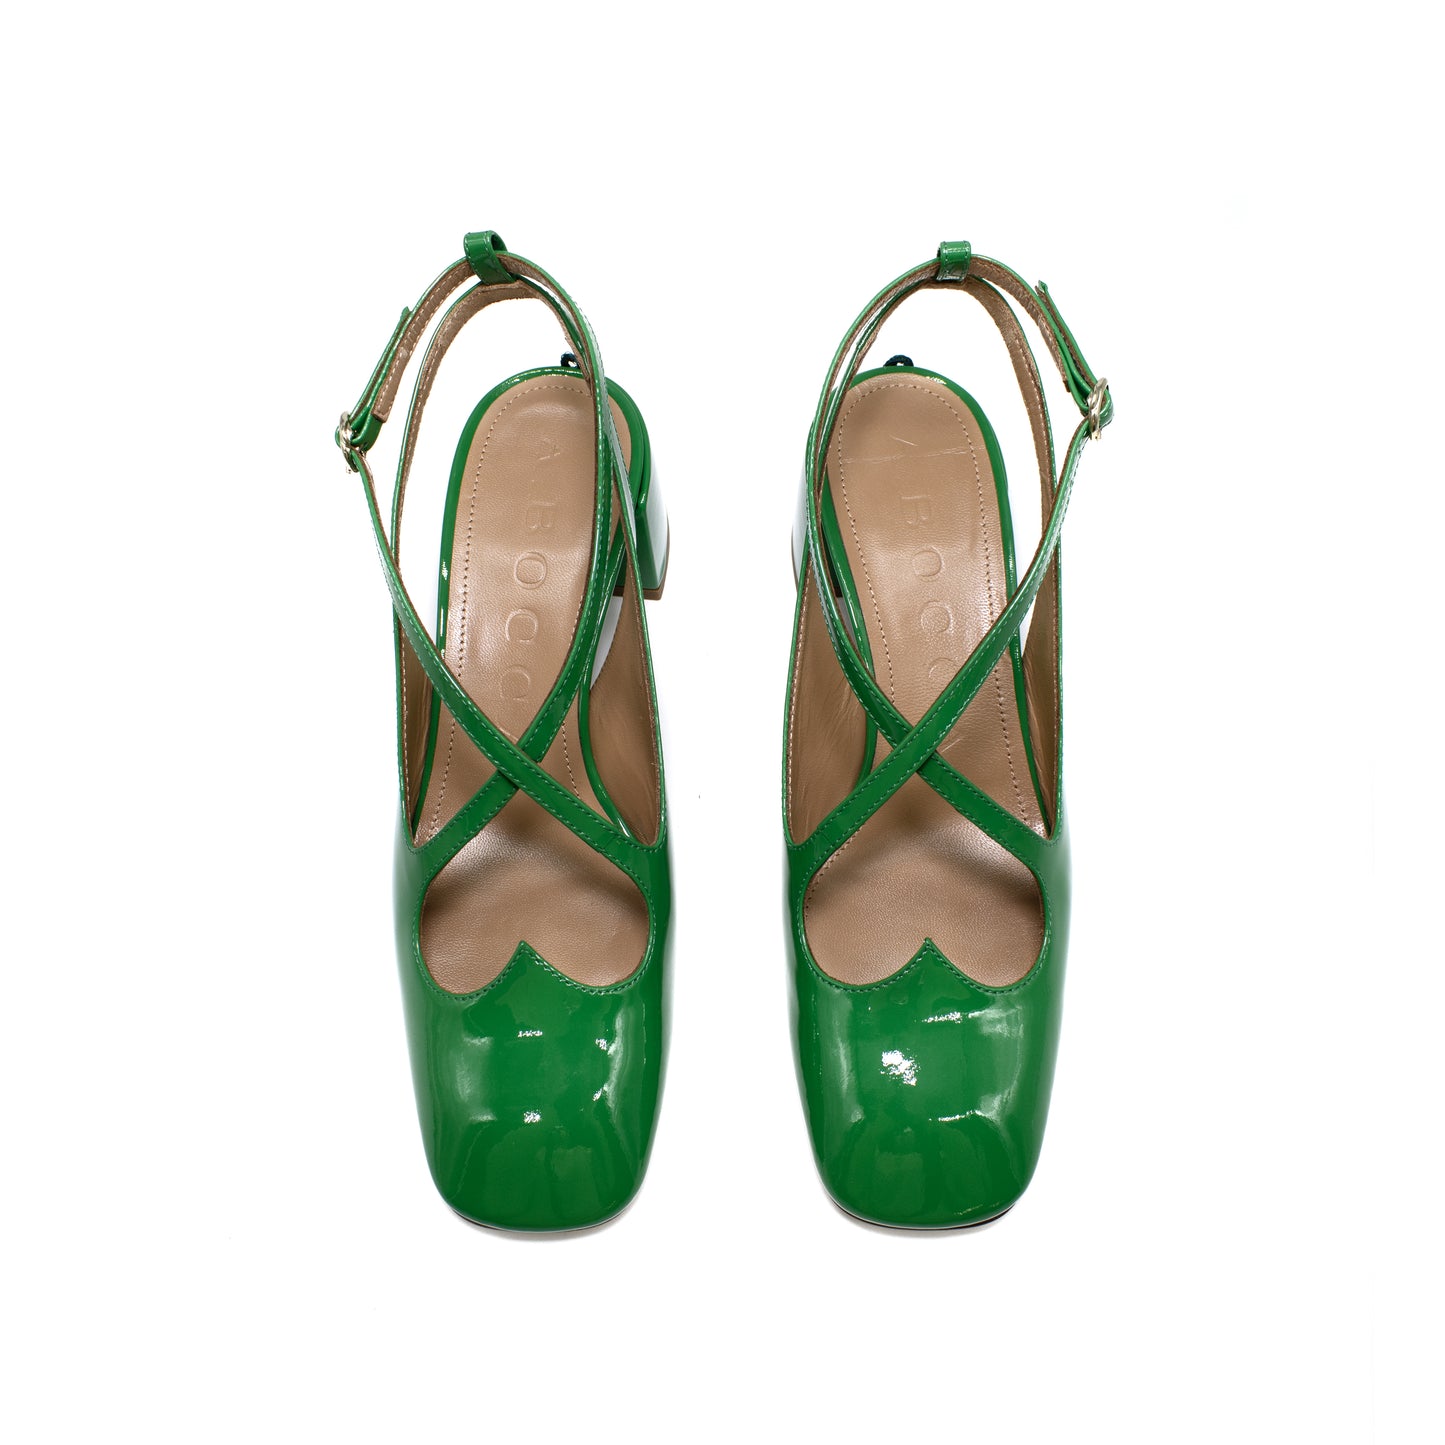 Sling Back Two for Love in cloverleaf patent leather